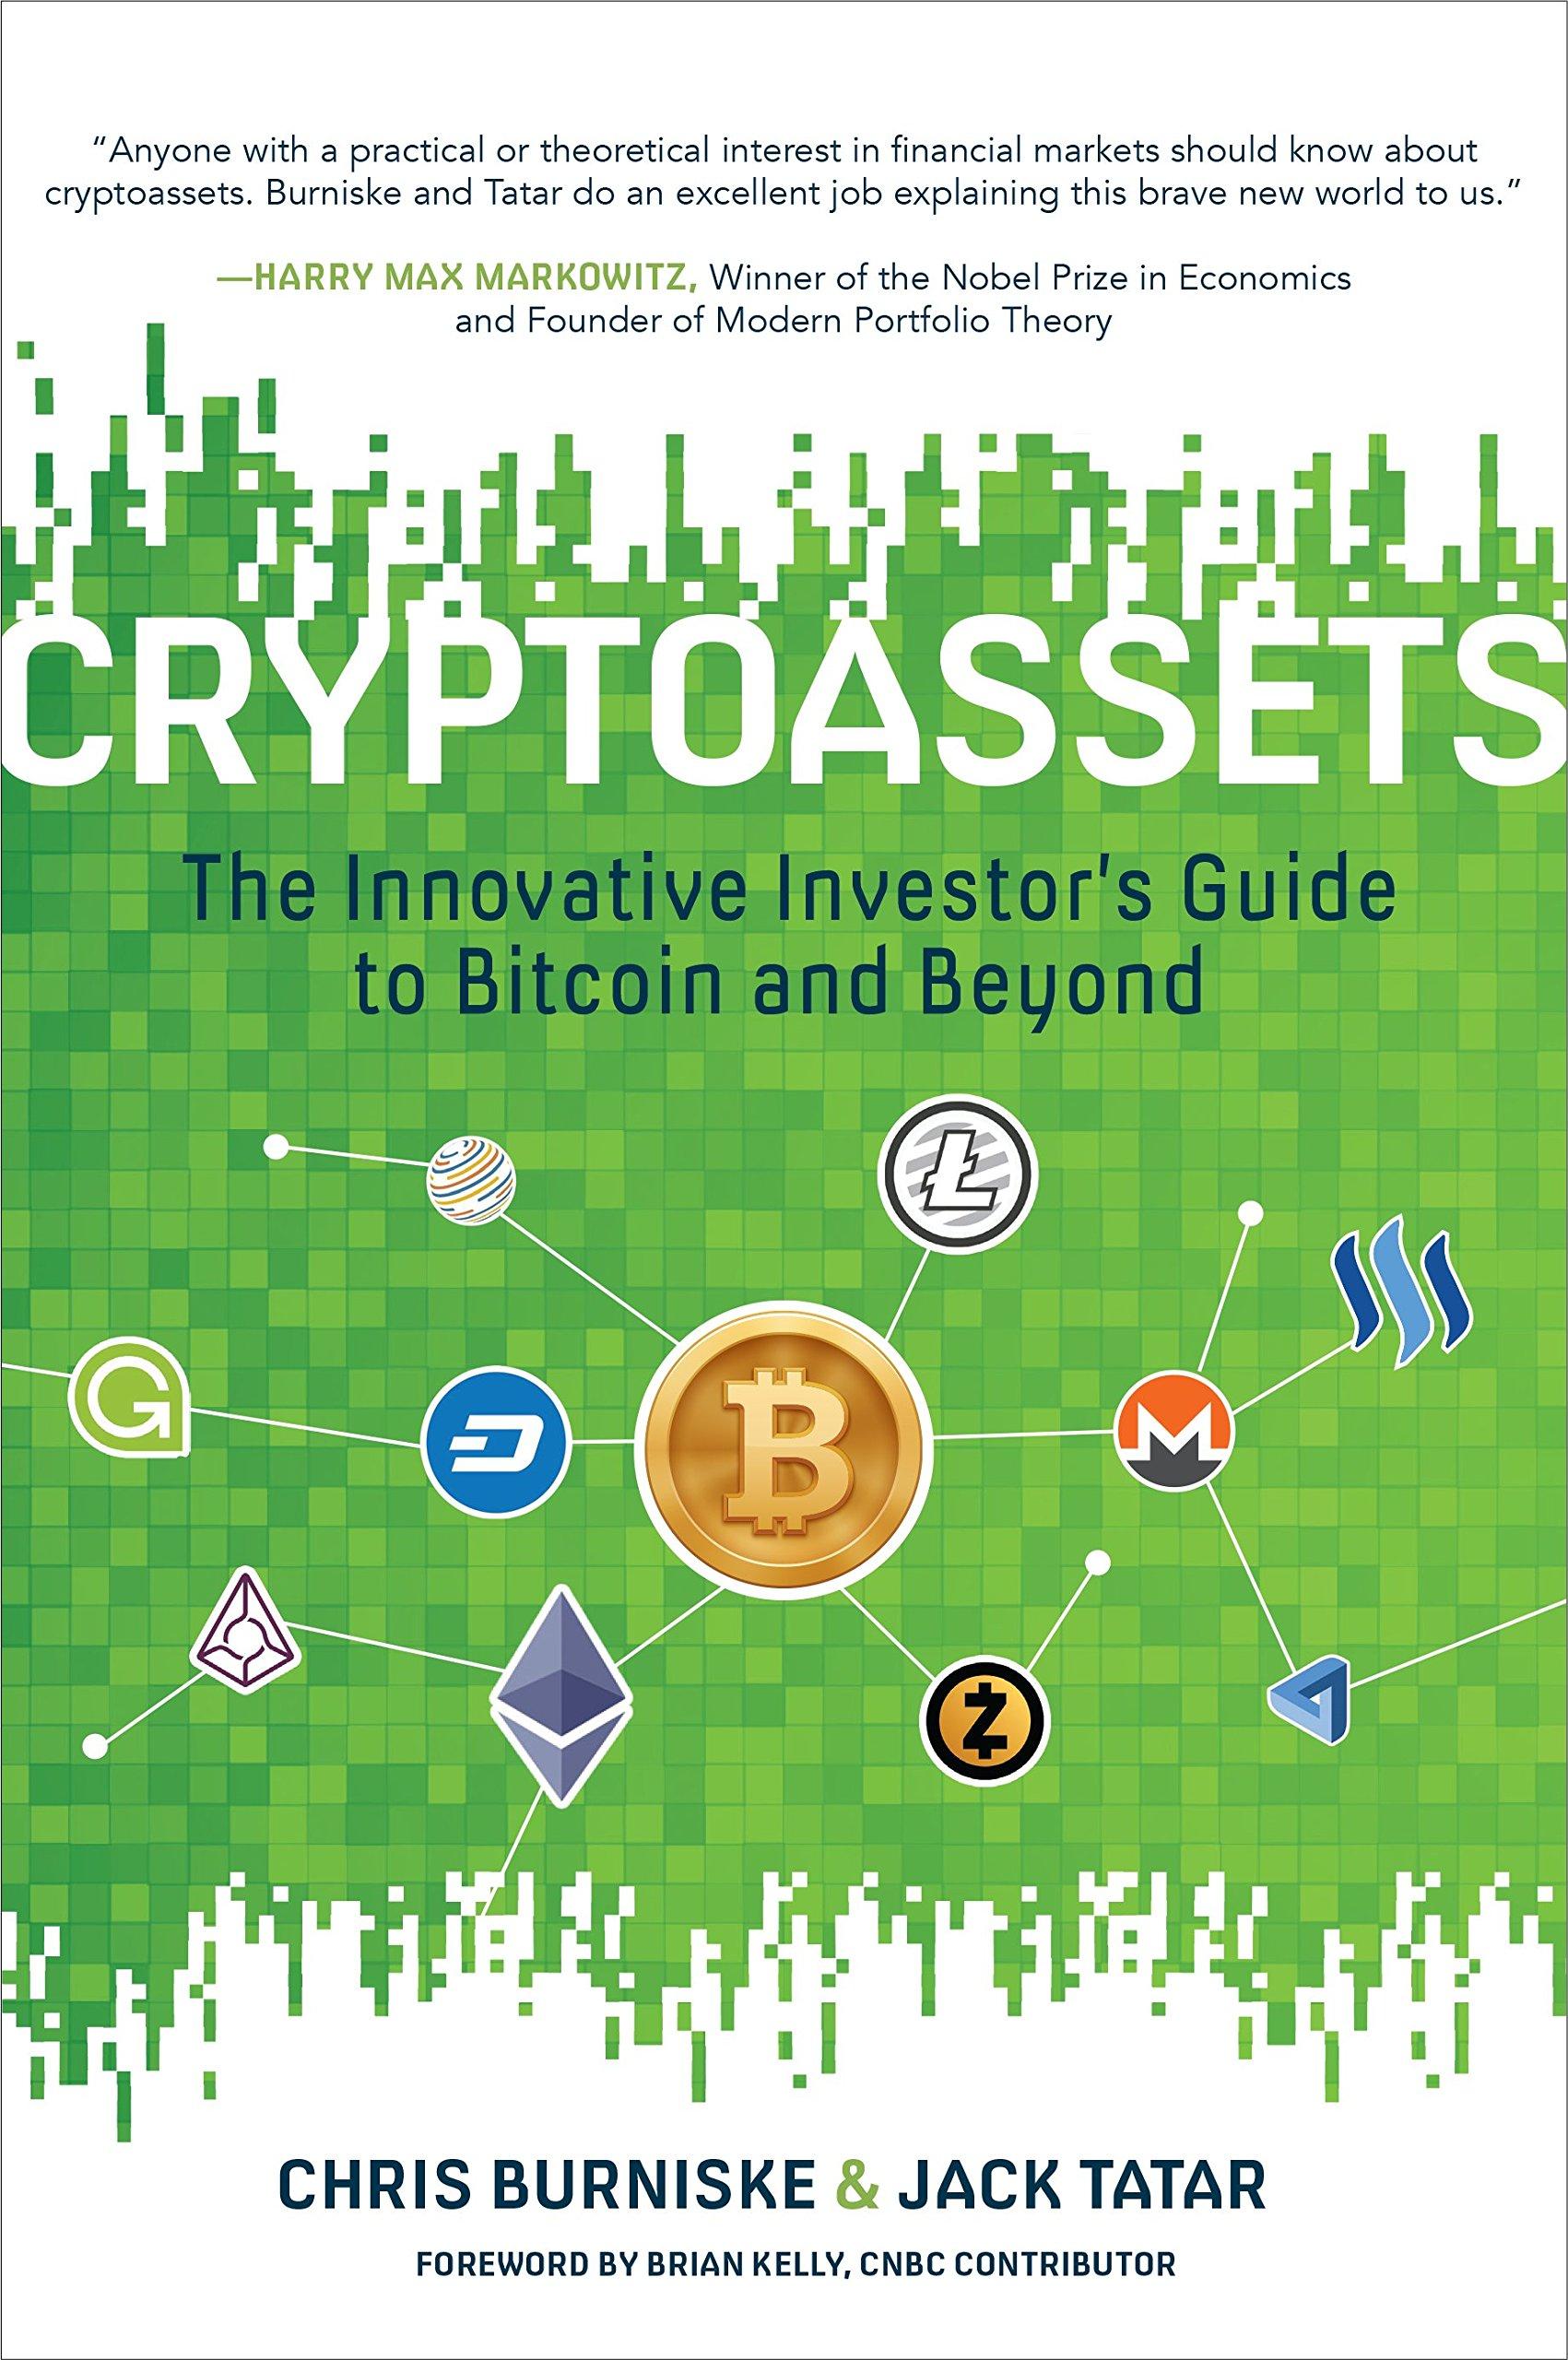 Cryptoassets: The Innovative Investor's Guide to Bitcoin and Beyond: by Chris Burniske and Jack Tatar